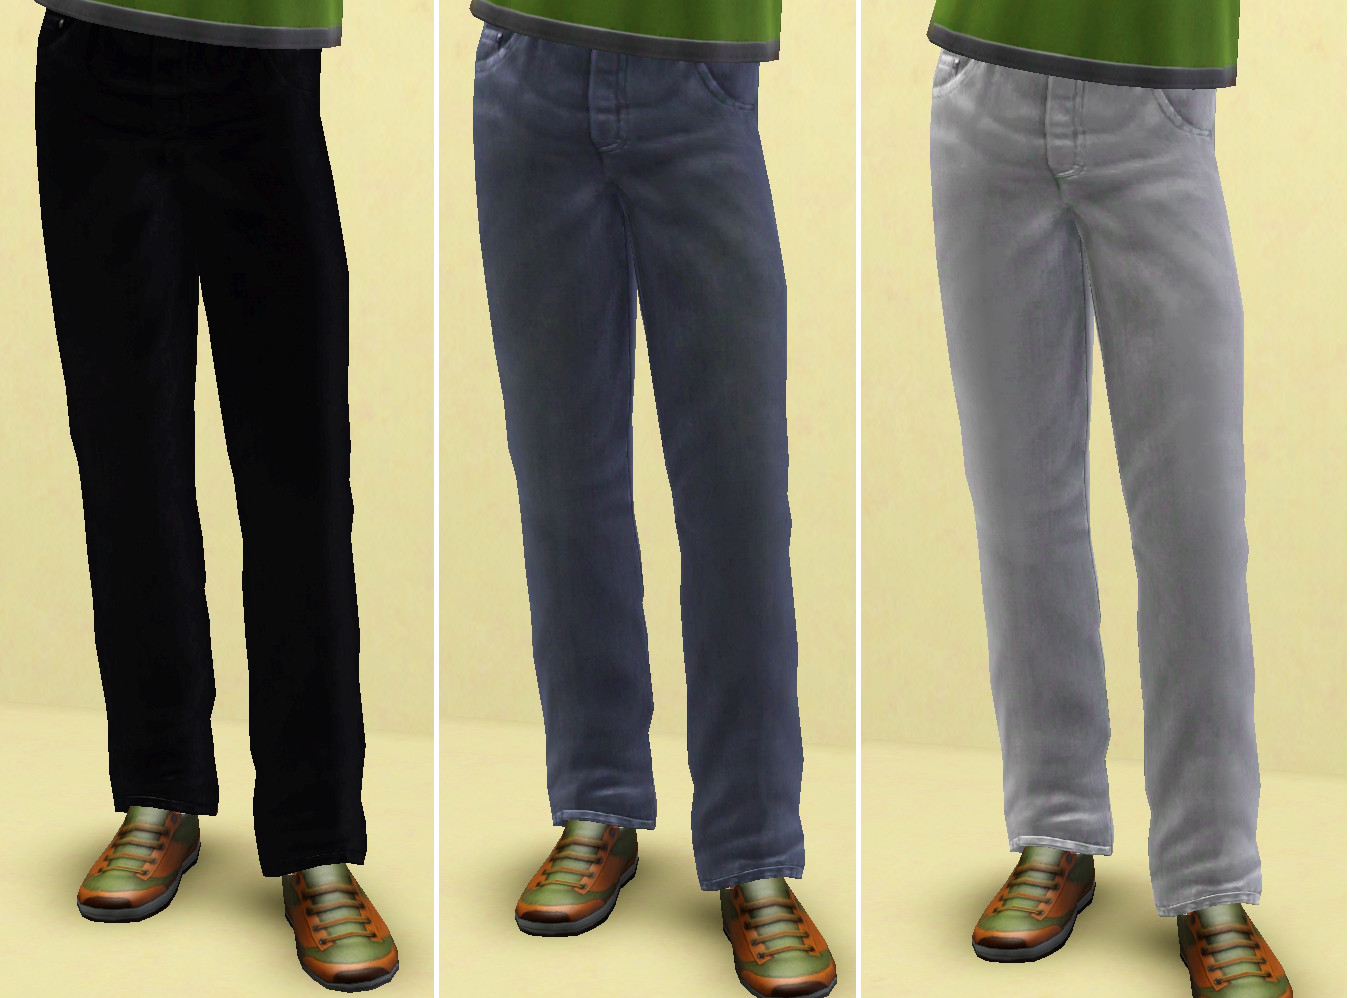 Изменение роста симс. SIMS 4 male Jeans. SIMS 4 skinny Jeans male.